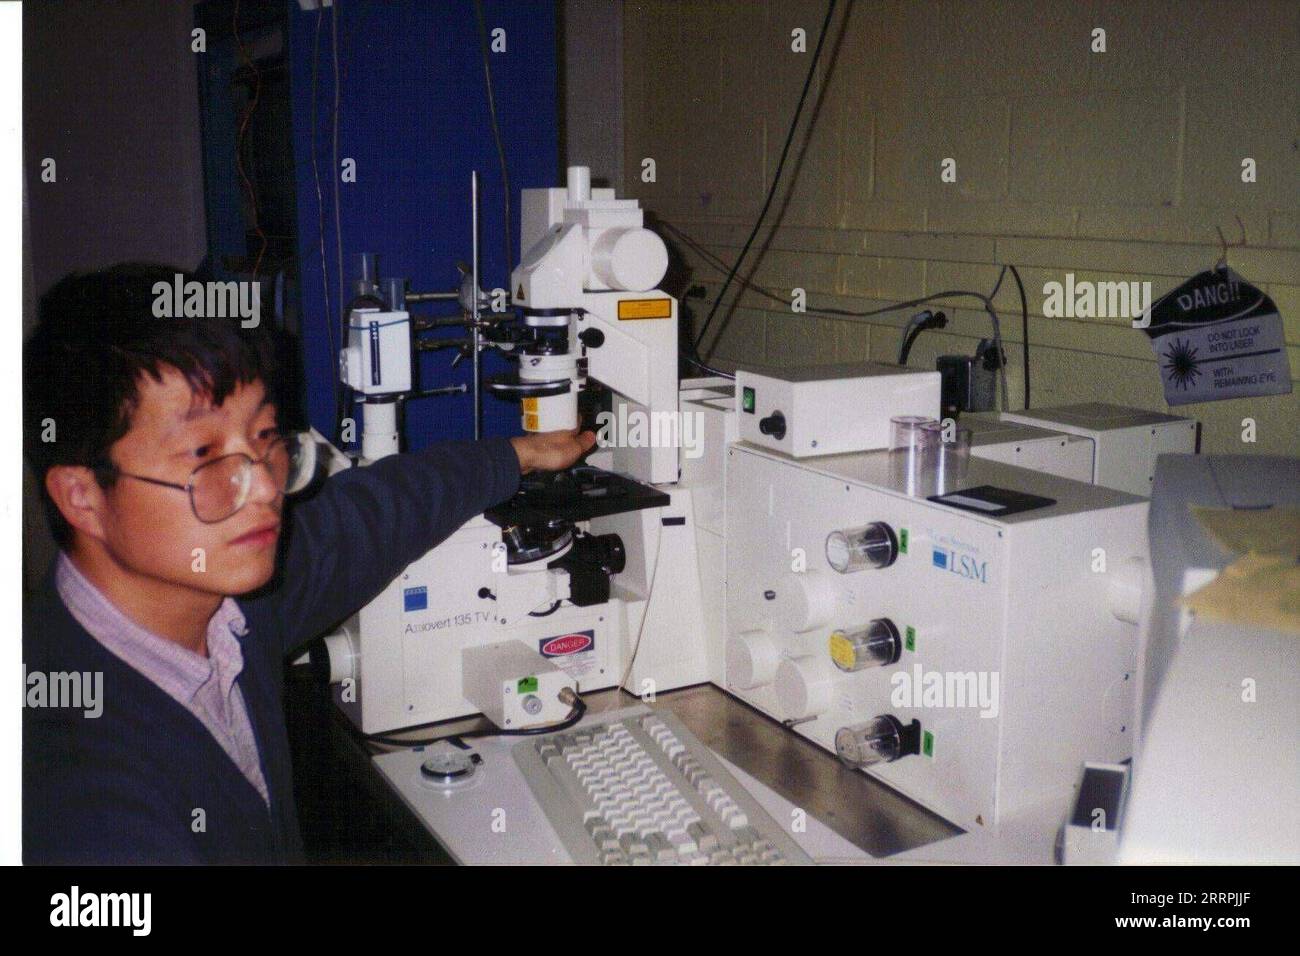 230328 -- BEIJING, March 28, 2023 -- This undated file photo provided by the interviewee shows Cheng Heping, now a leading Chinese biomedical expert, operating a confocal microscope in a research lab in Maryland, the Untied States back in 1995. TO GO WITH Profile: A brain scientist s decades-long focus on photons CHINA-BRAIN SCIENTIST-PHOTONS CN ChexYunlong PUBLICATIONxNOTxINxCHN Stock Photo